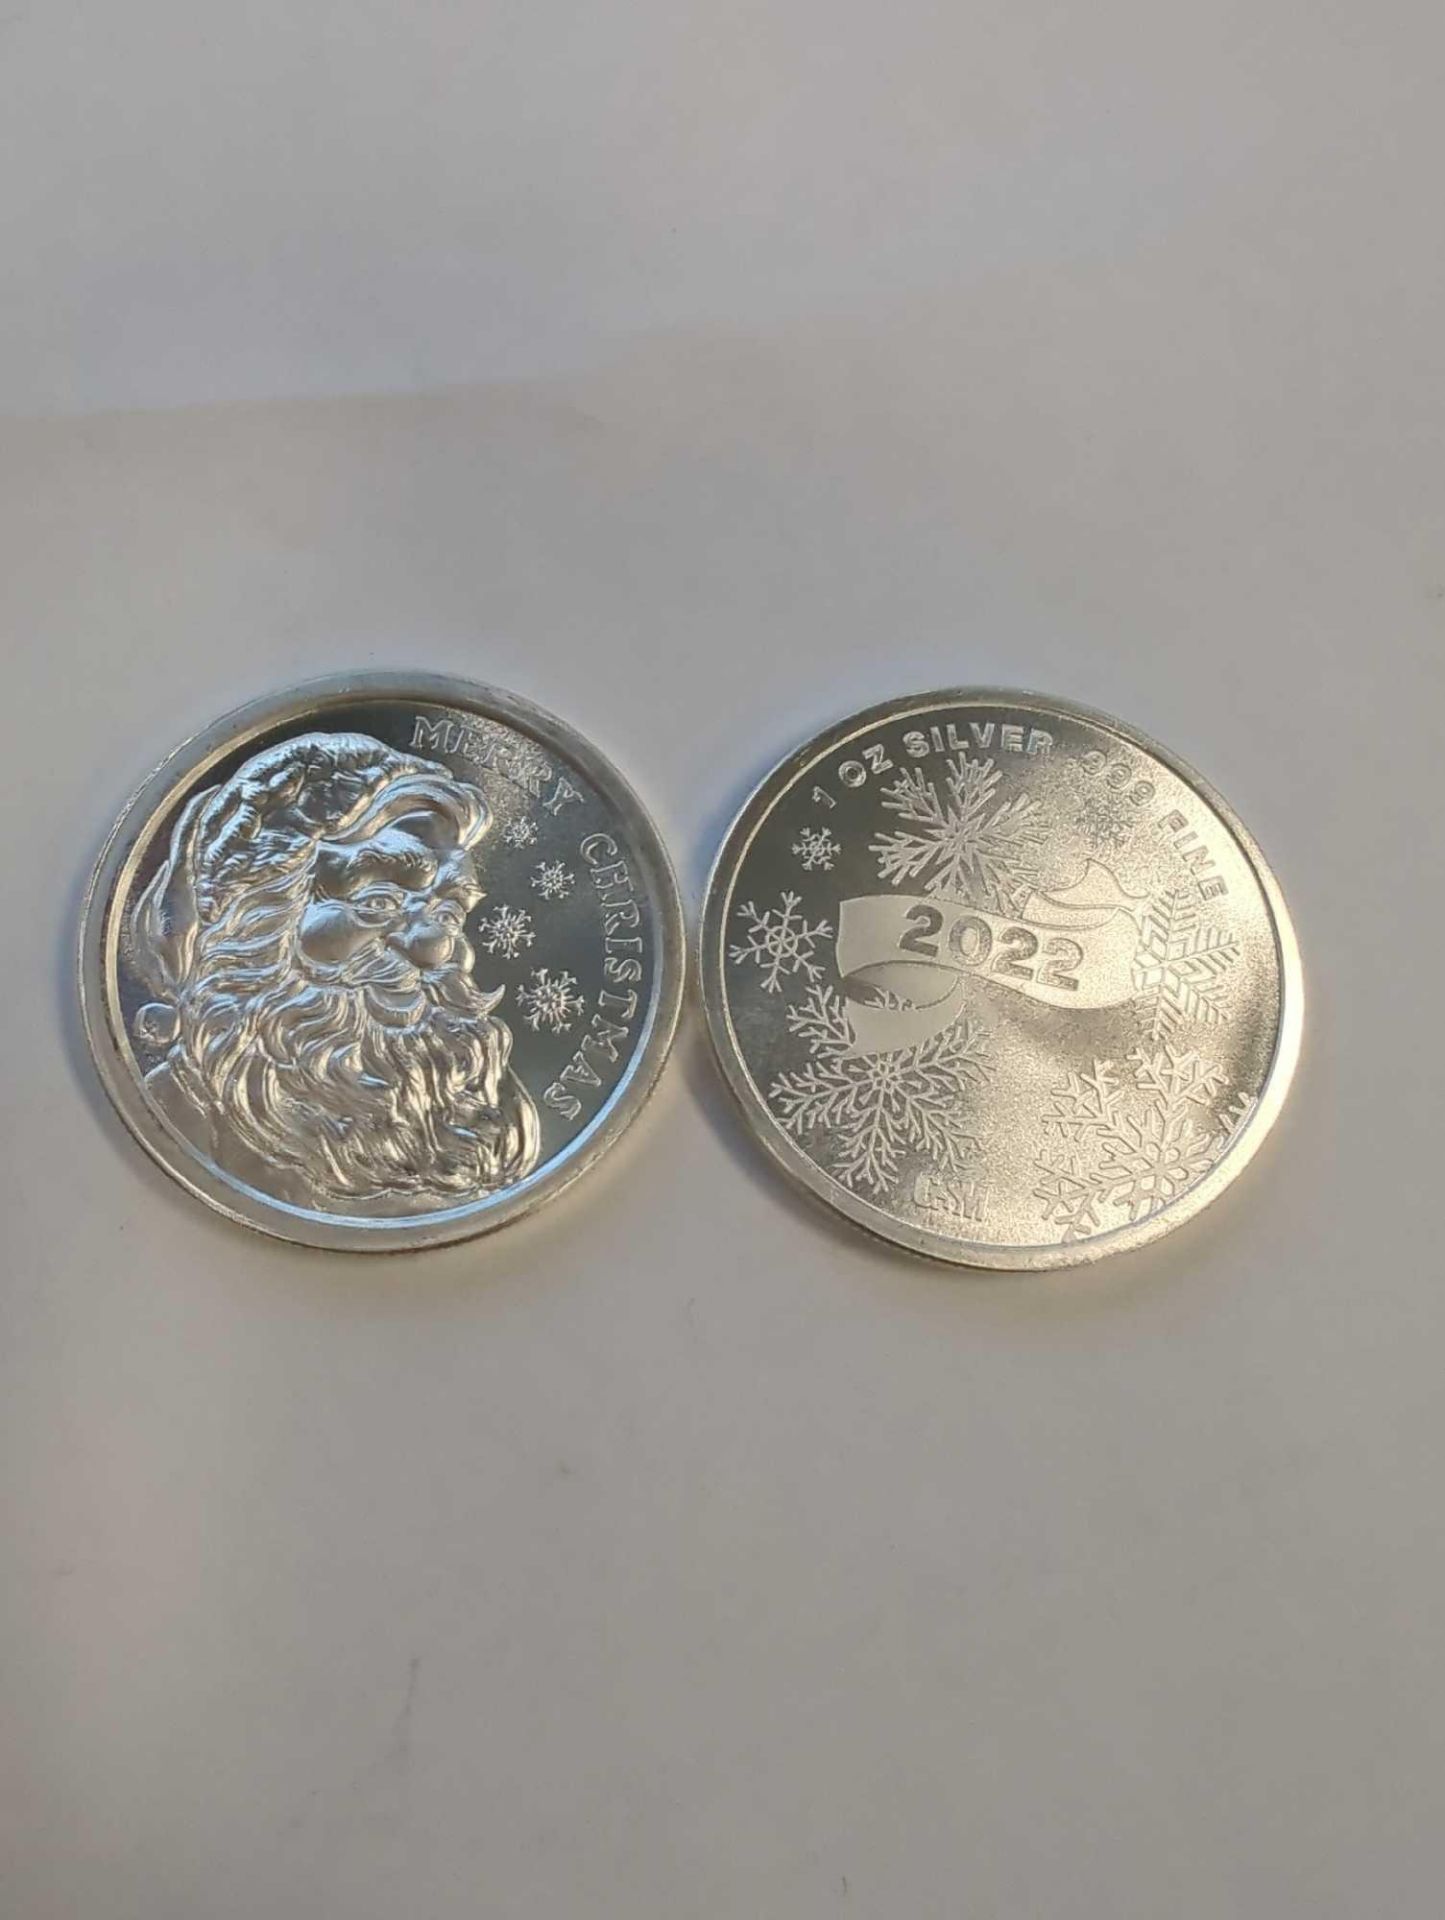 2 2022 merry Christmas silver coins